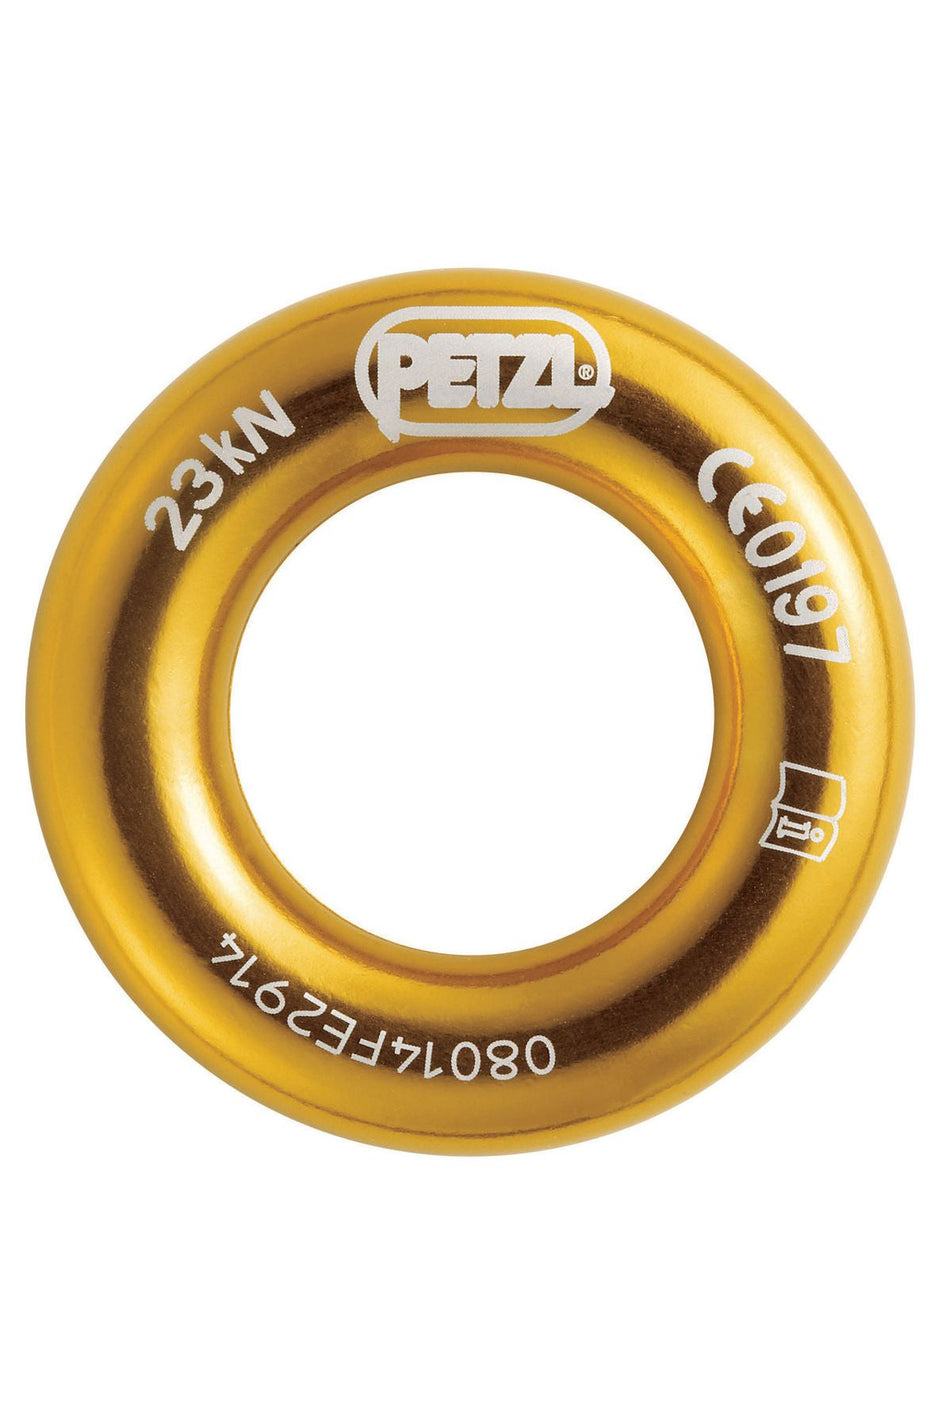 Petzl Connection Ring - Anton's Timber